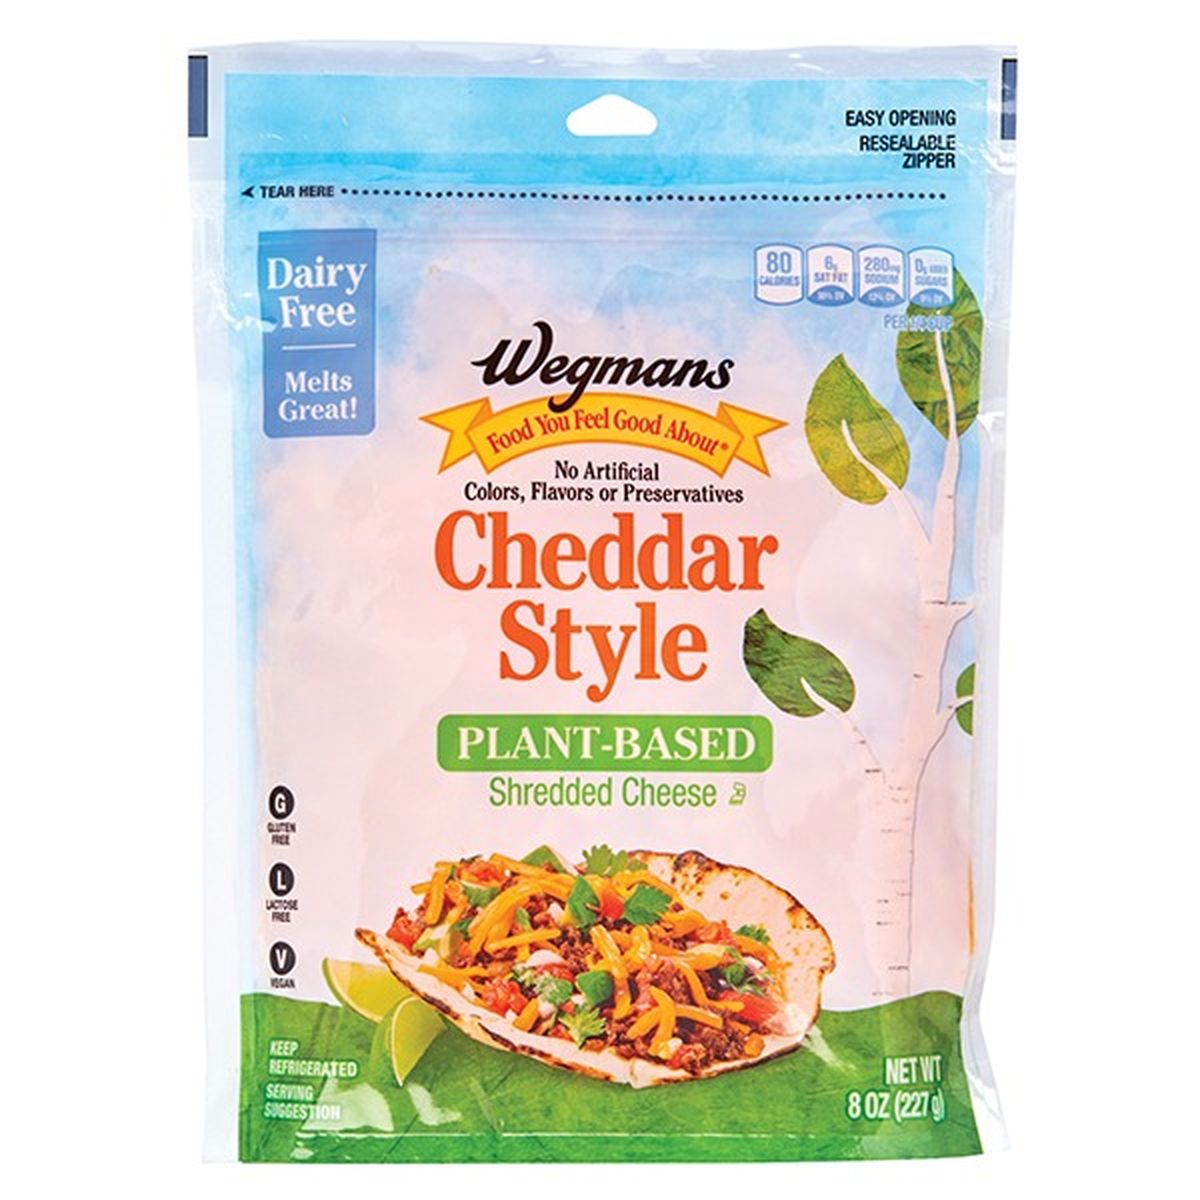 Calories in Wegmans Cheddar Style Plant Based Shredded Cheese